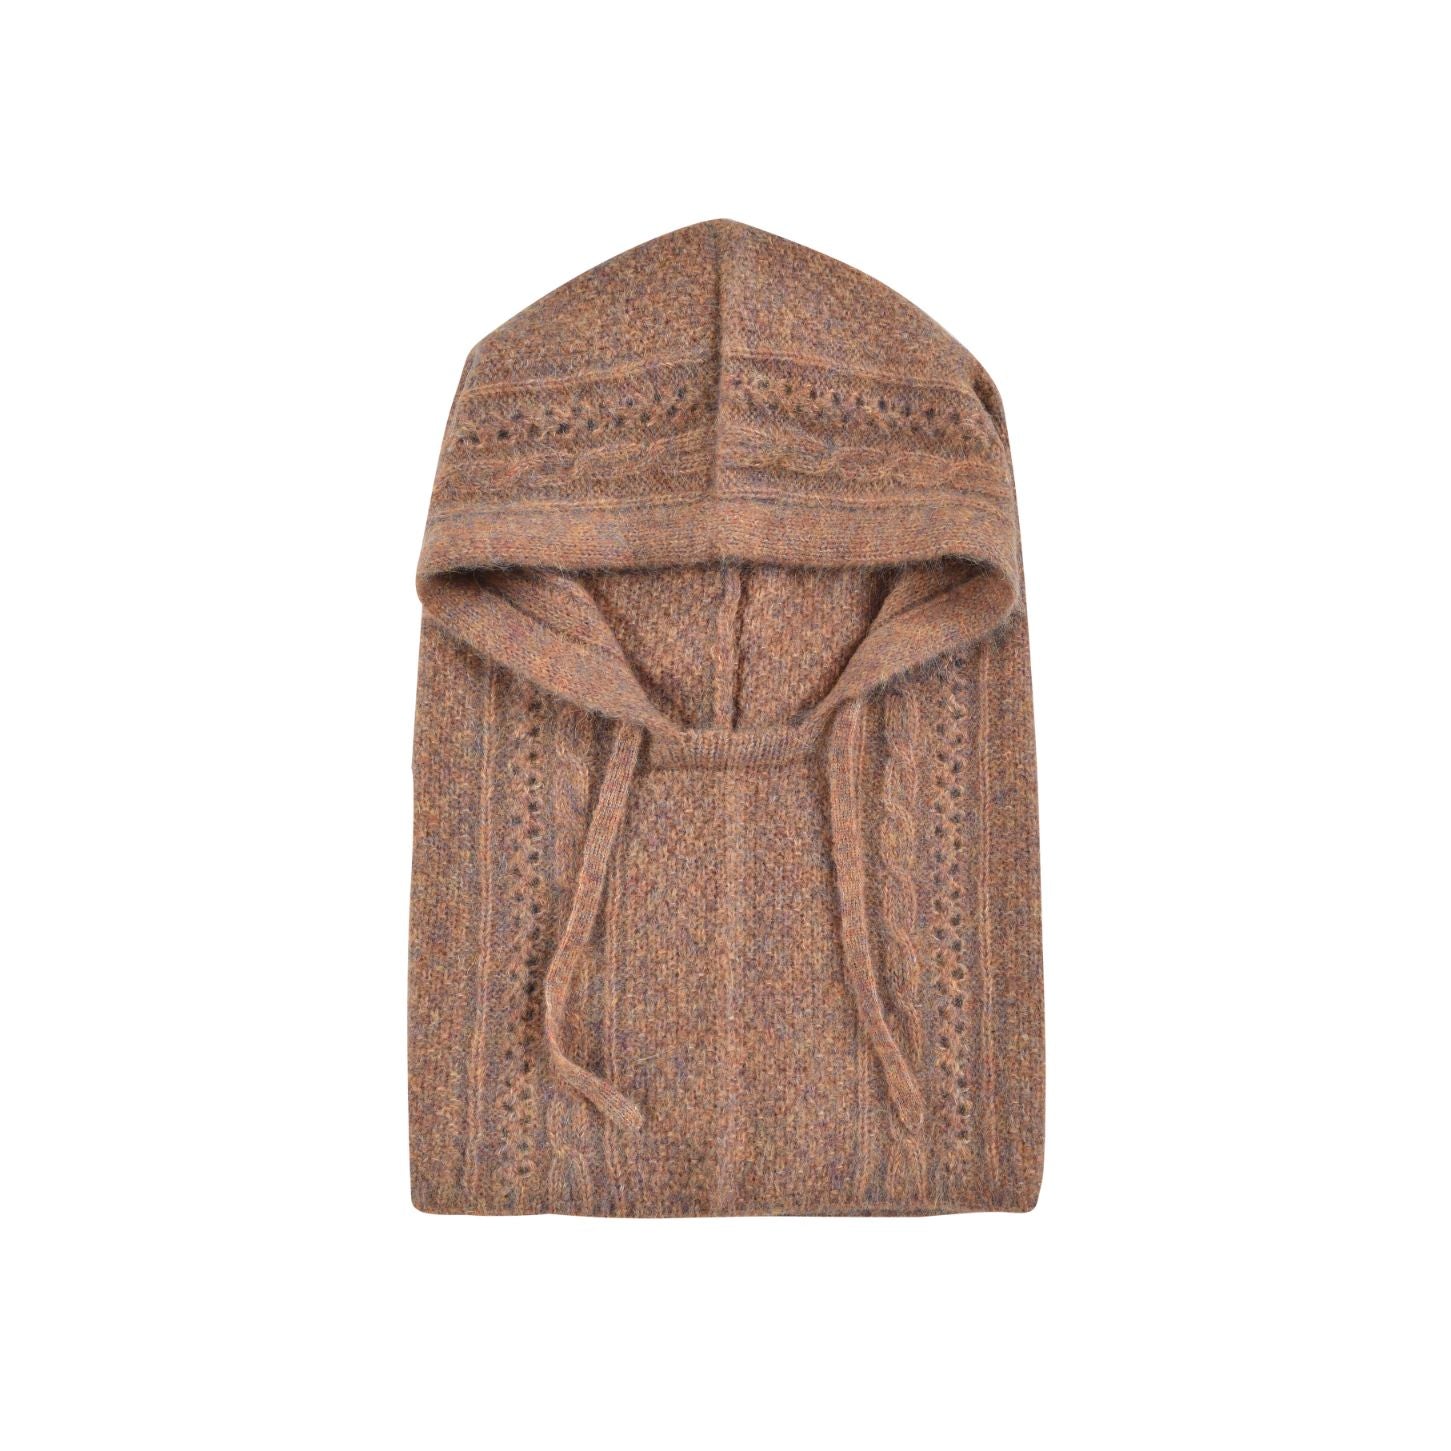 Shop women's hood ( hat and scarf) in cinnamon colour online in Hong Kong and Singapore at Milimilu by Louise Misha. This women's hood is beautifully woven and breathable but also keeps you warm and stylish. The best gift for women on Christmas this season, women's winter hat and hood for upcoming ski trips.